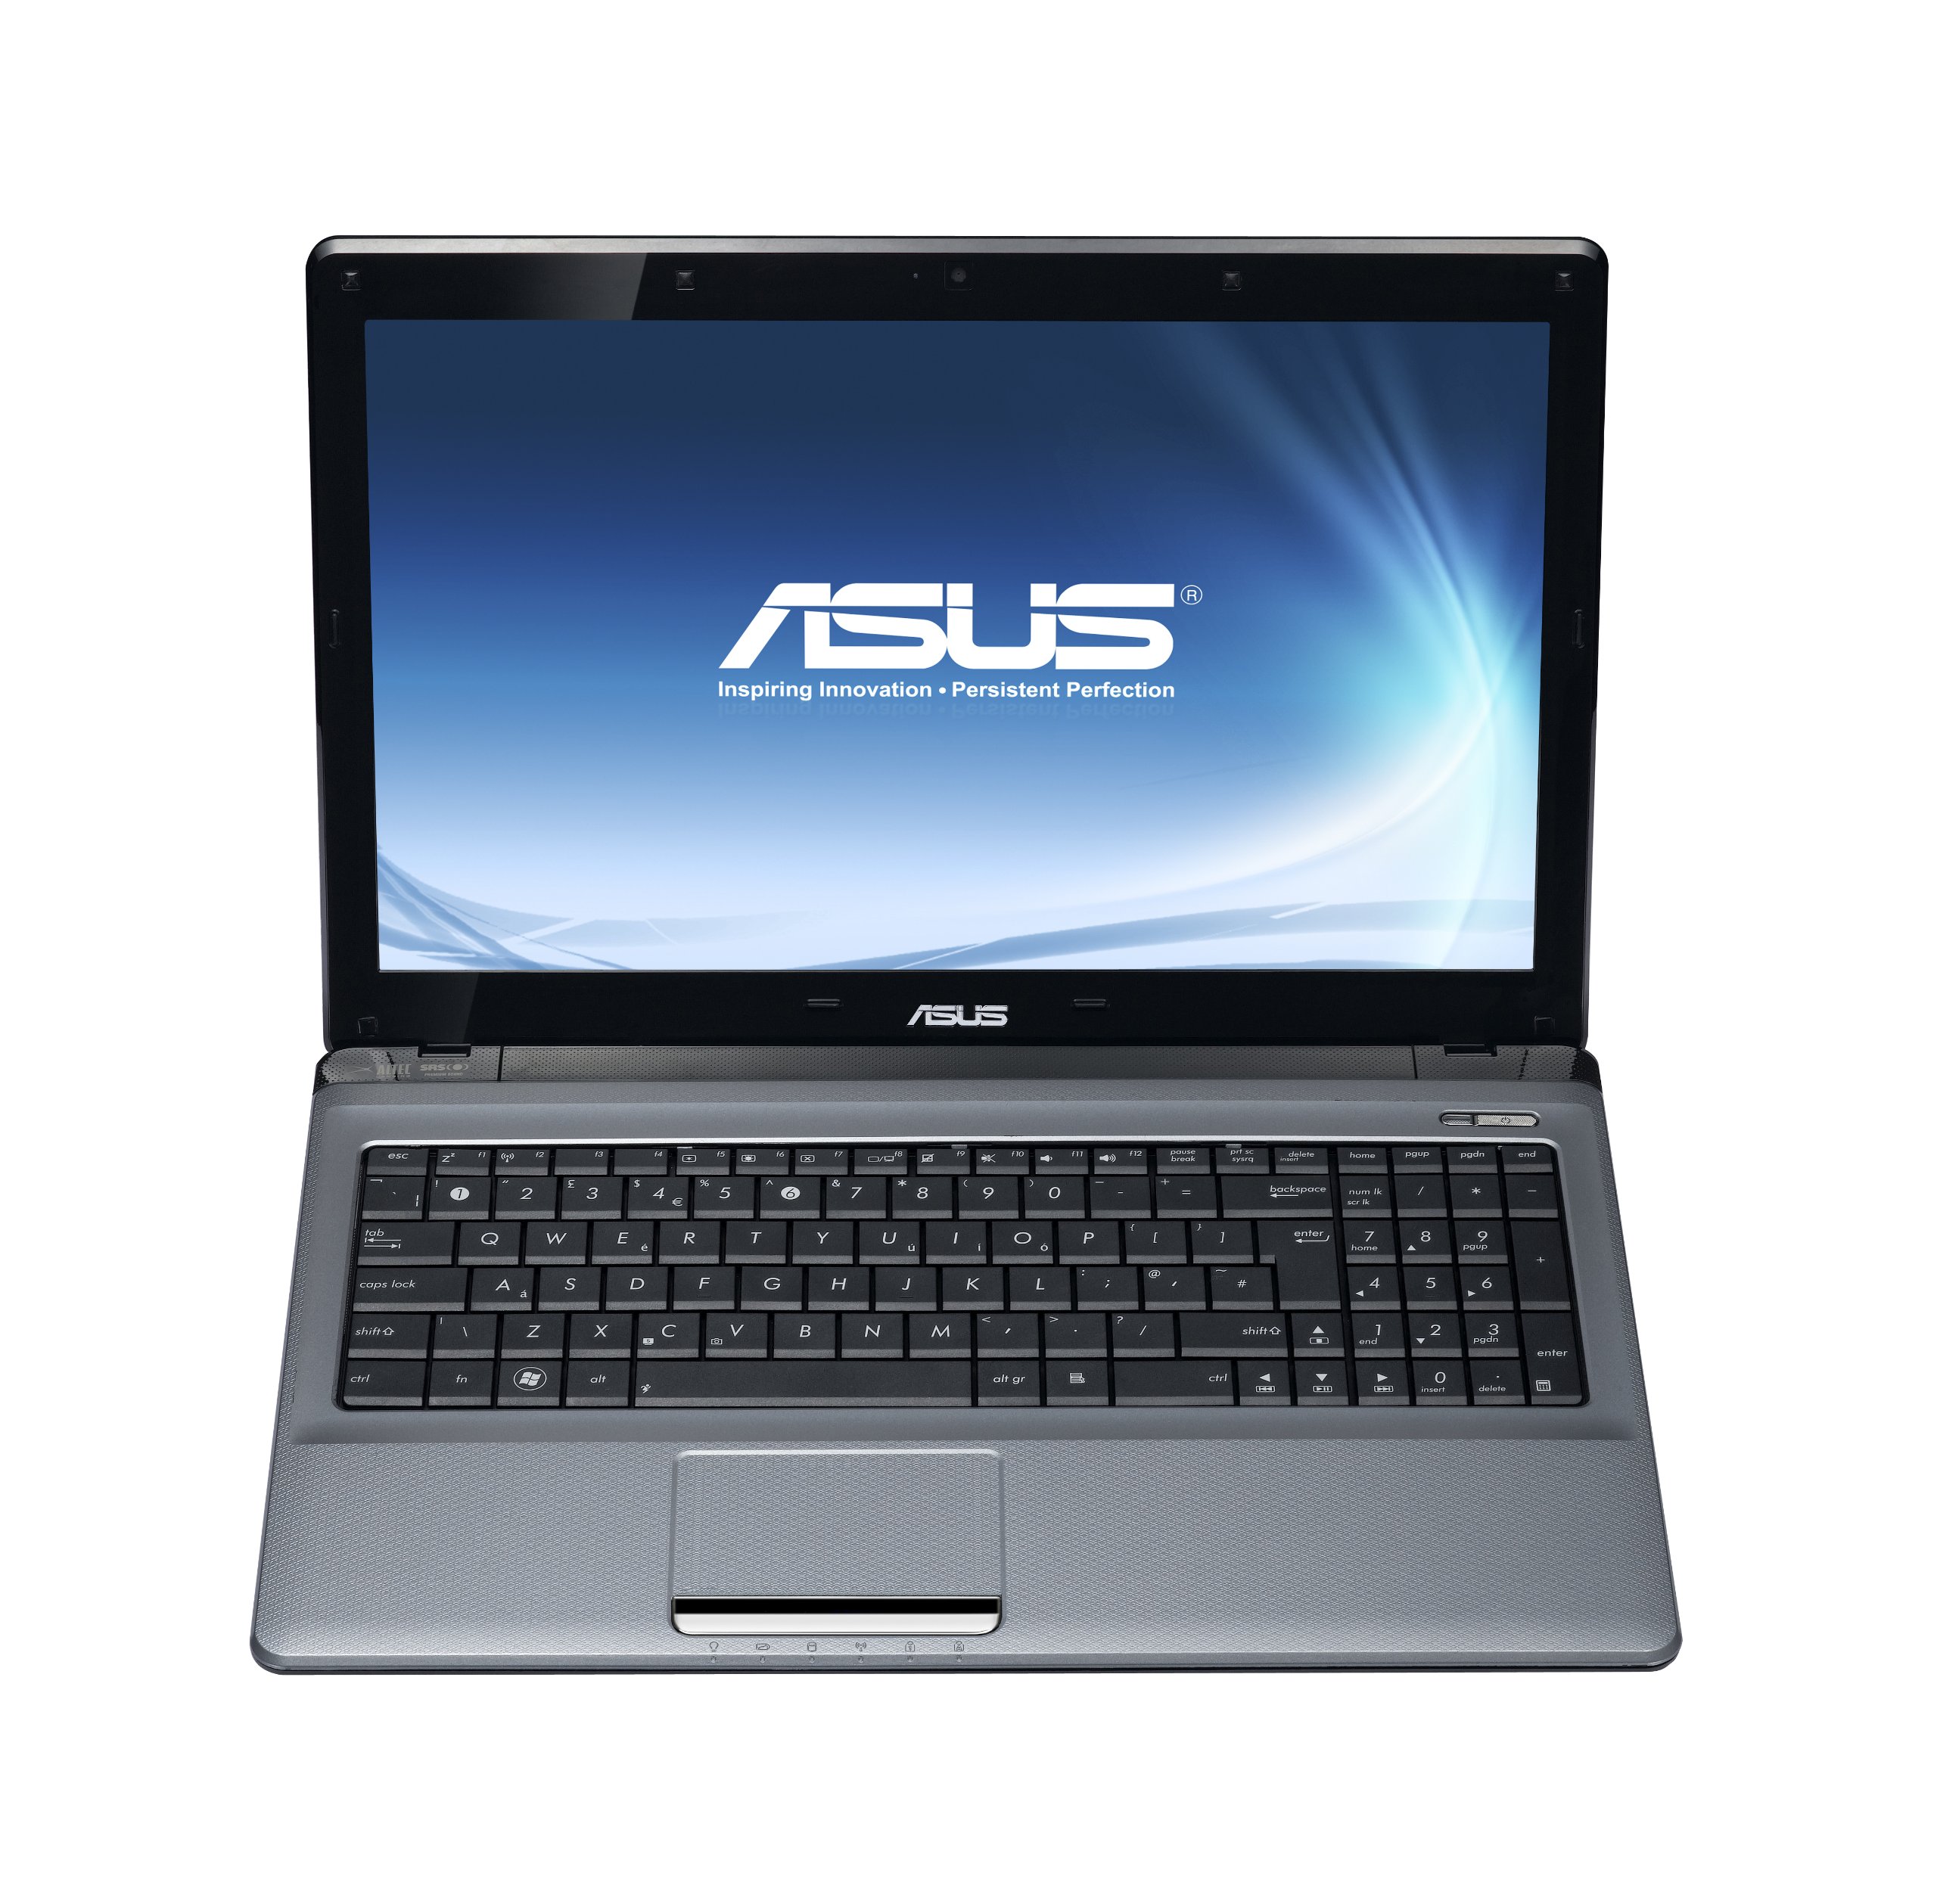 Asus A53SV Notebook